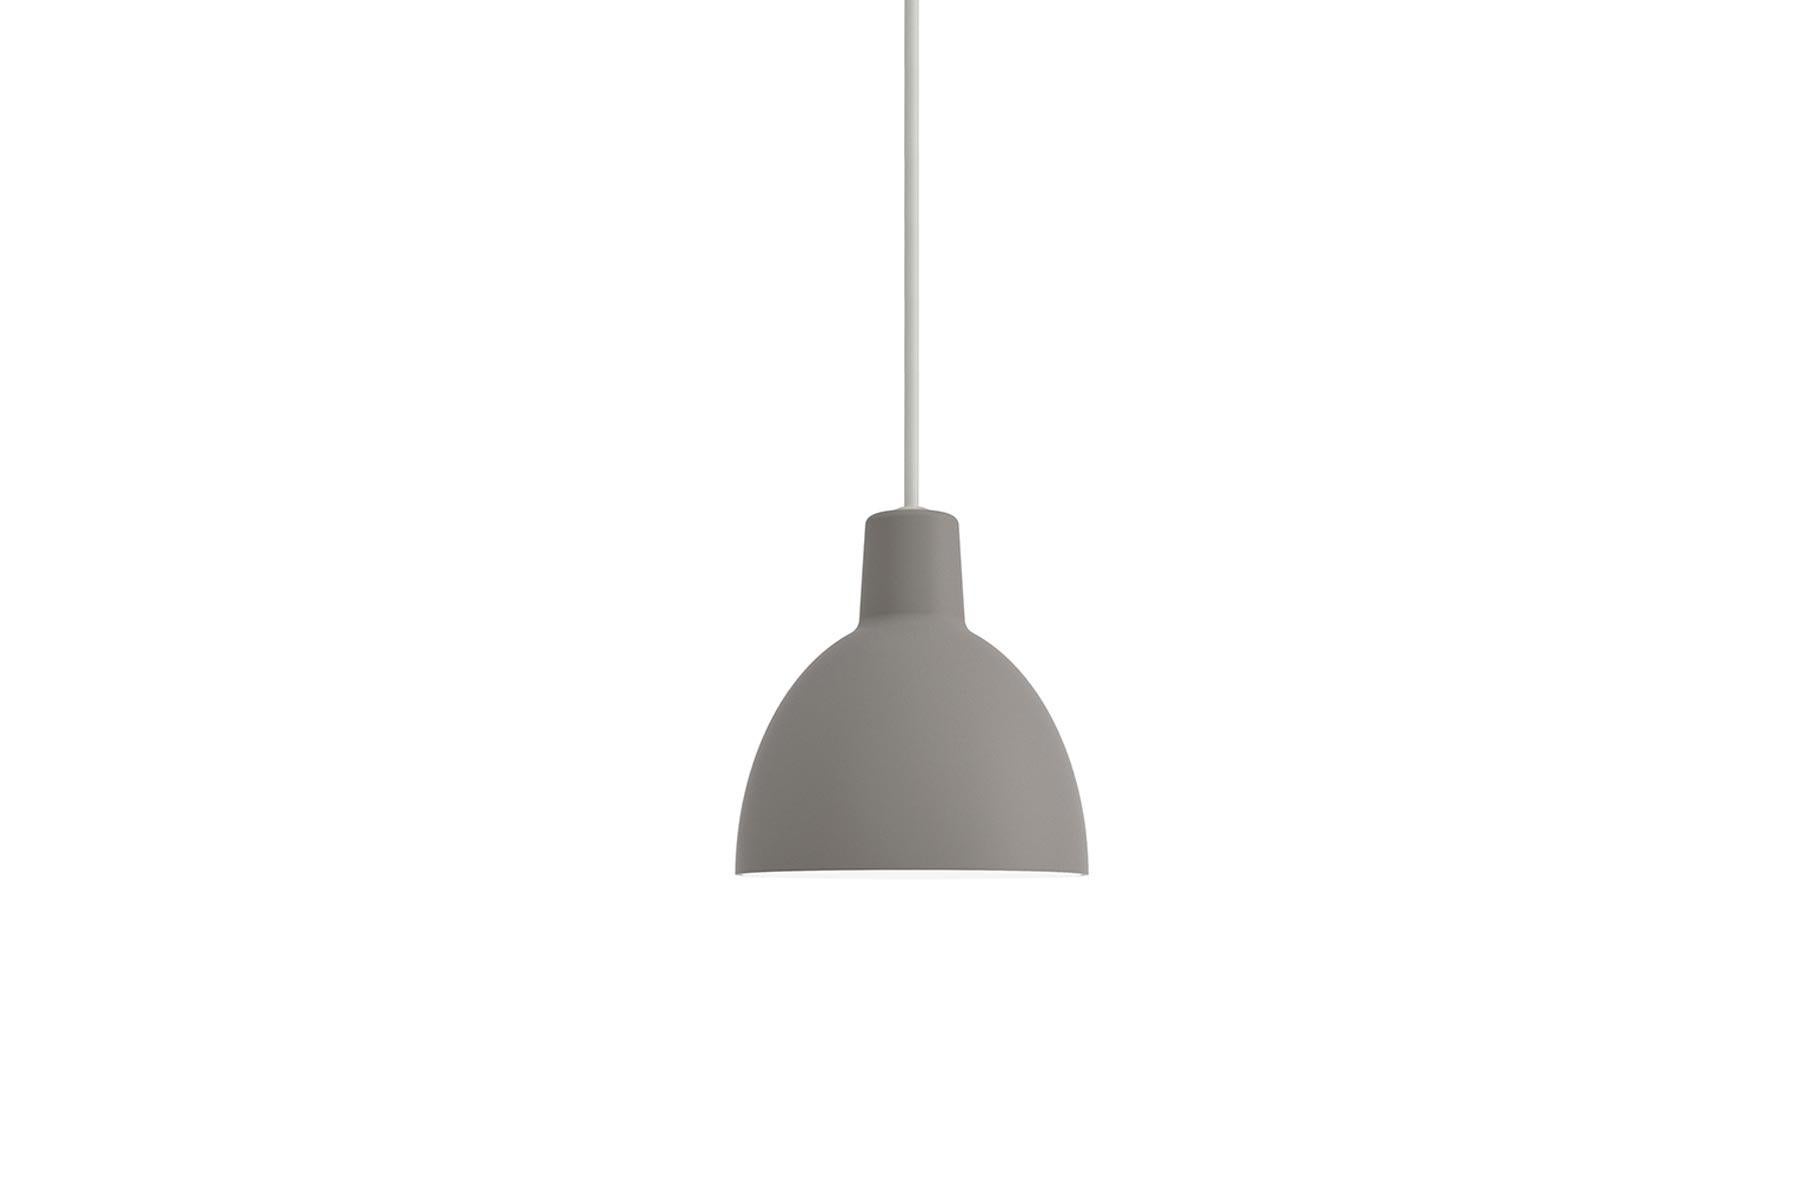 The pendant emits soft downwards directed light. The matte, white-painted inside of the elliptical shade helps to assure even distribution of the light. The Louis Poulsen design team developed the Toldbod family based on the light distribution of